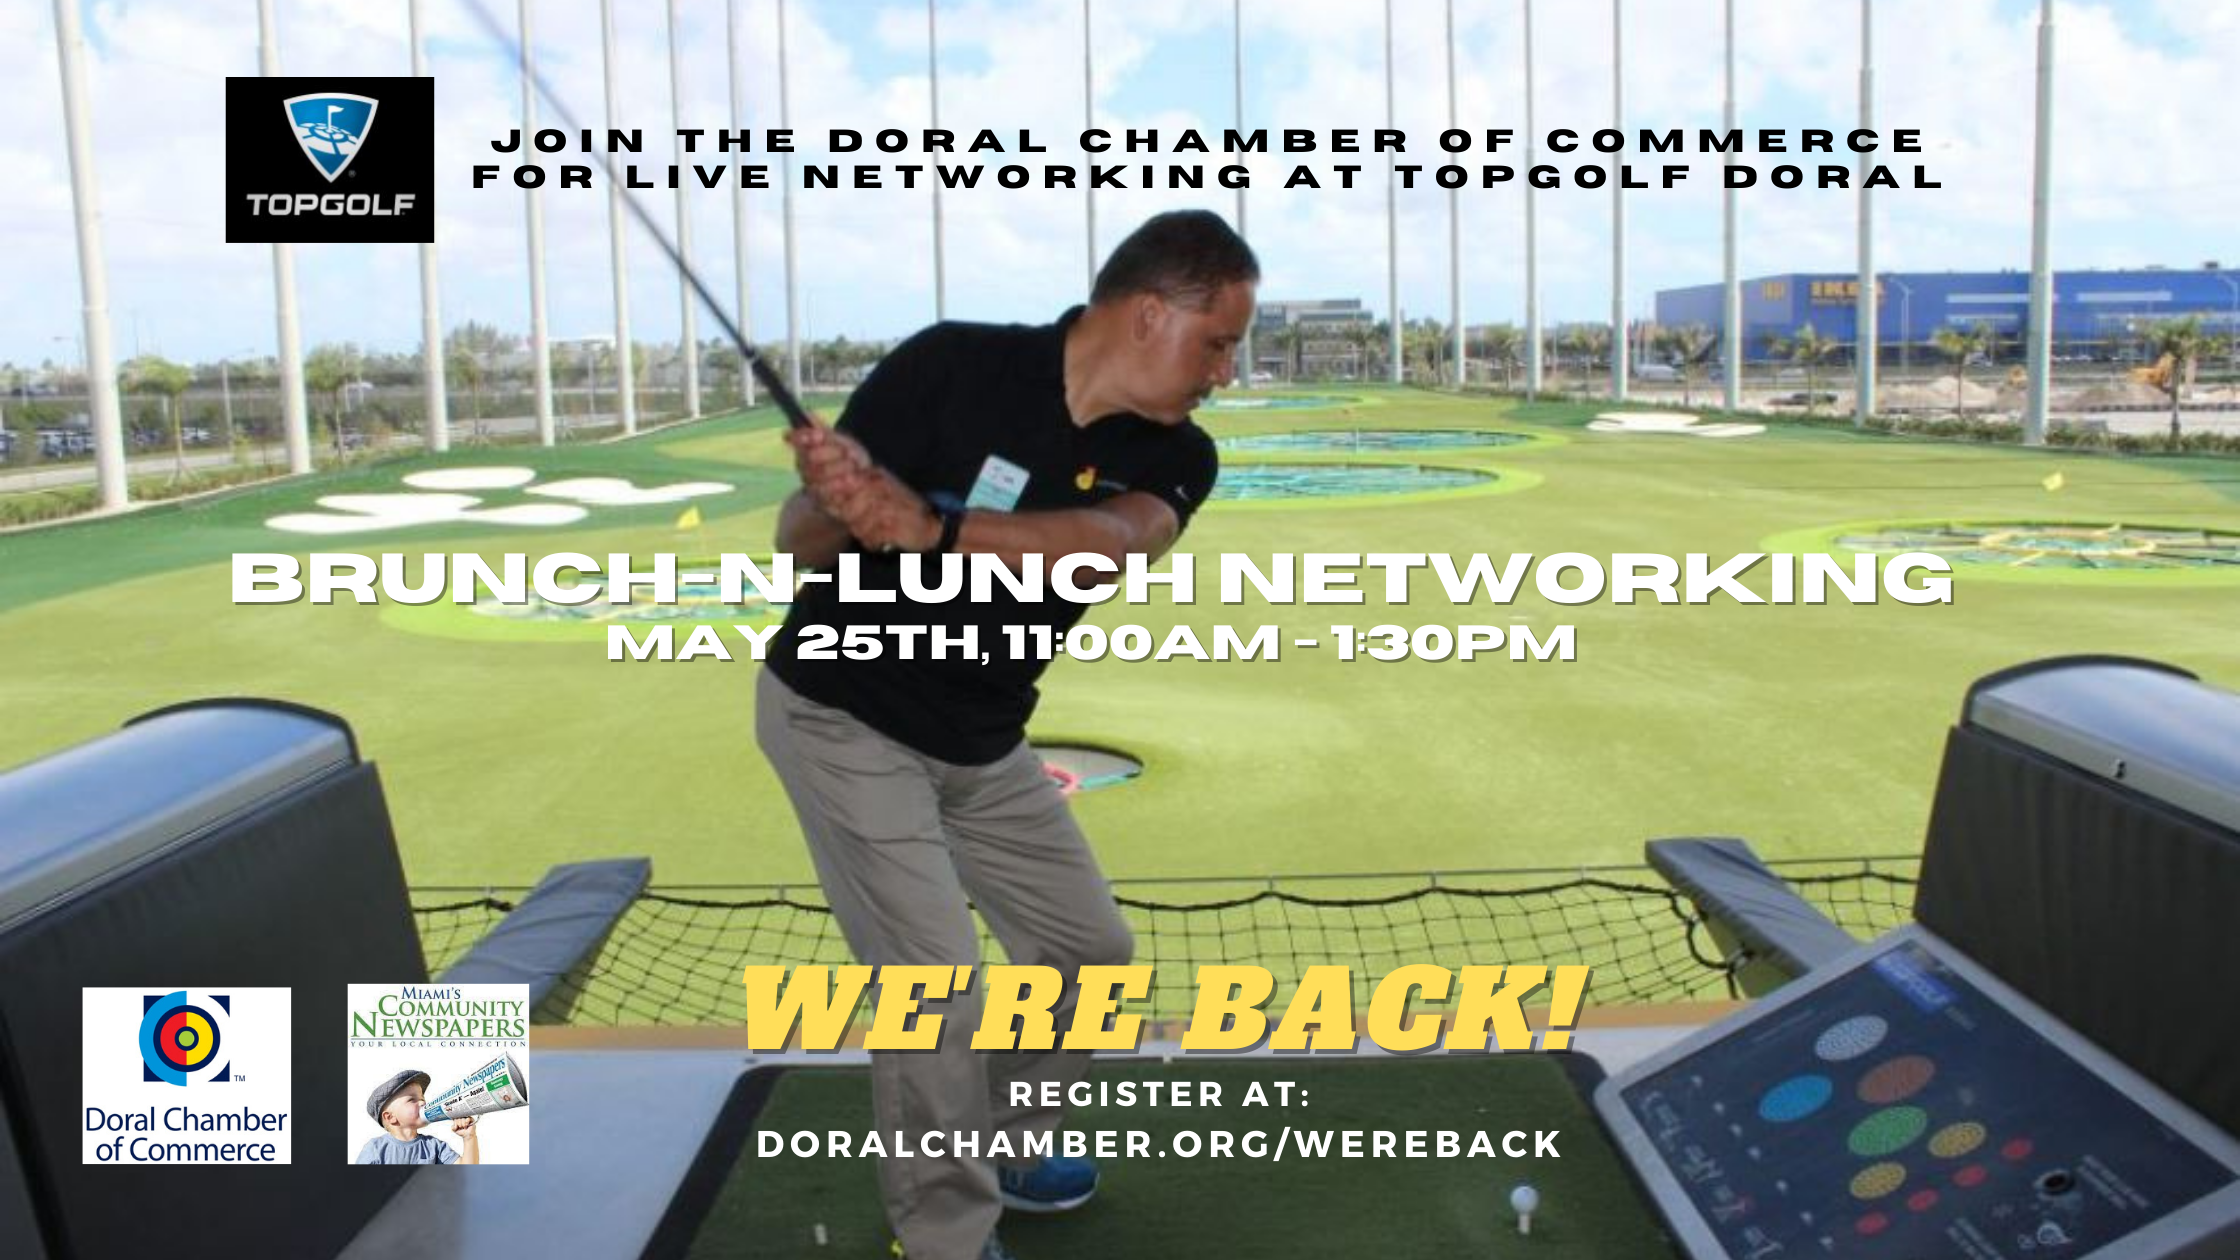 Professional Brunch-n-Lunch Networking Event at Topgolf Miami-Doral